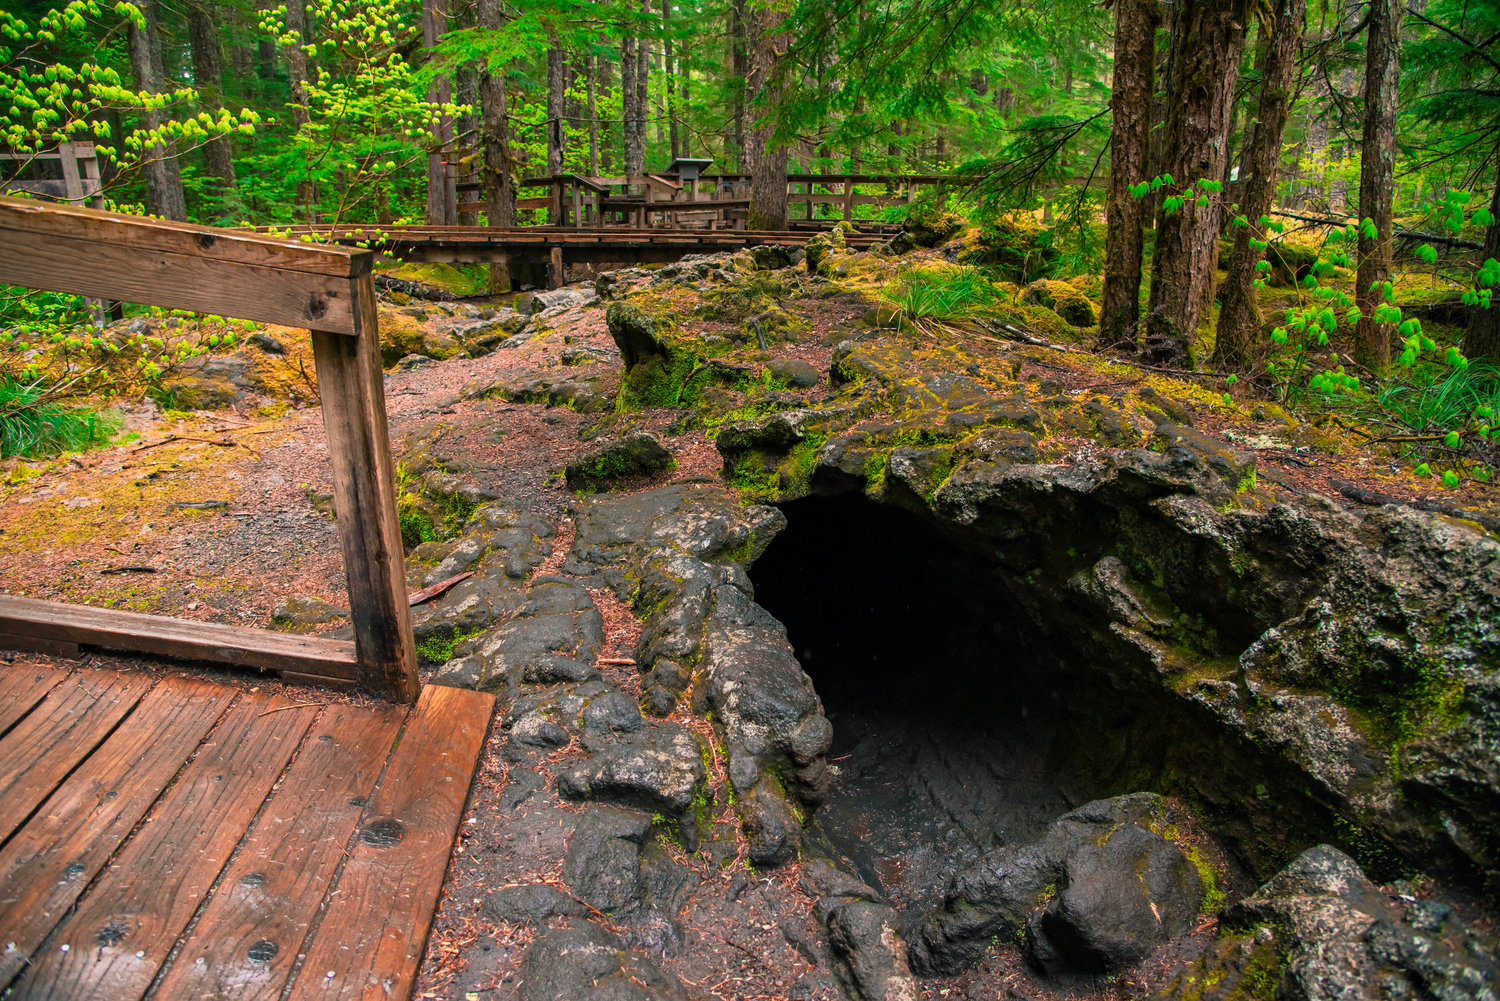 The Trail of Two Forests Interpretive Site